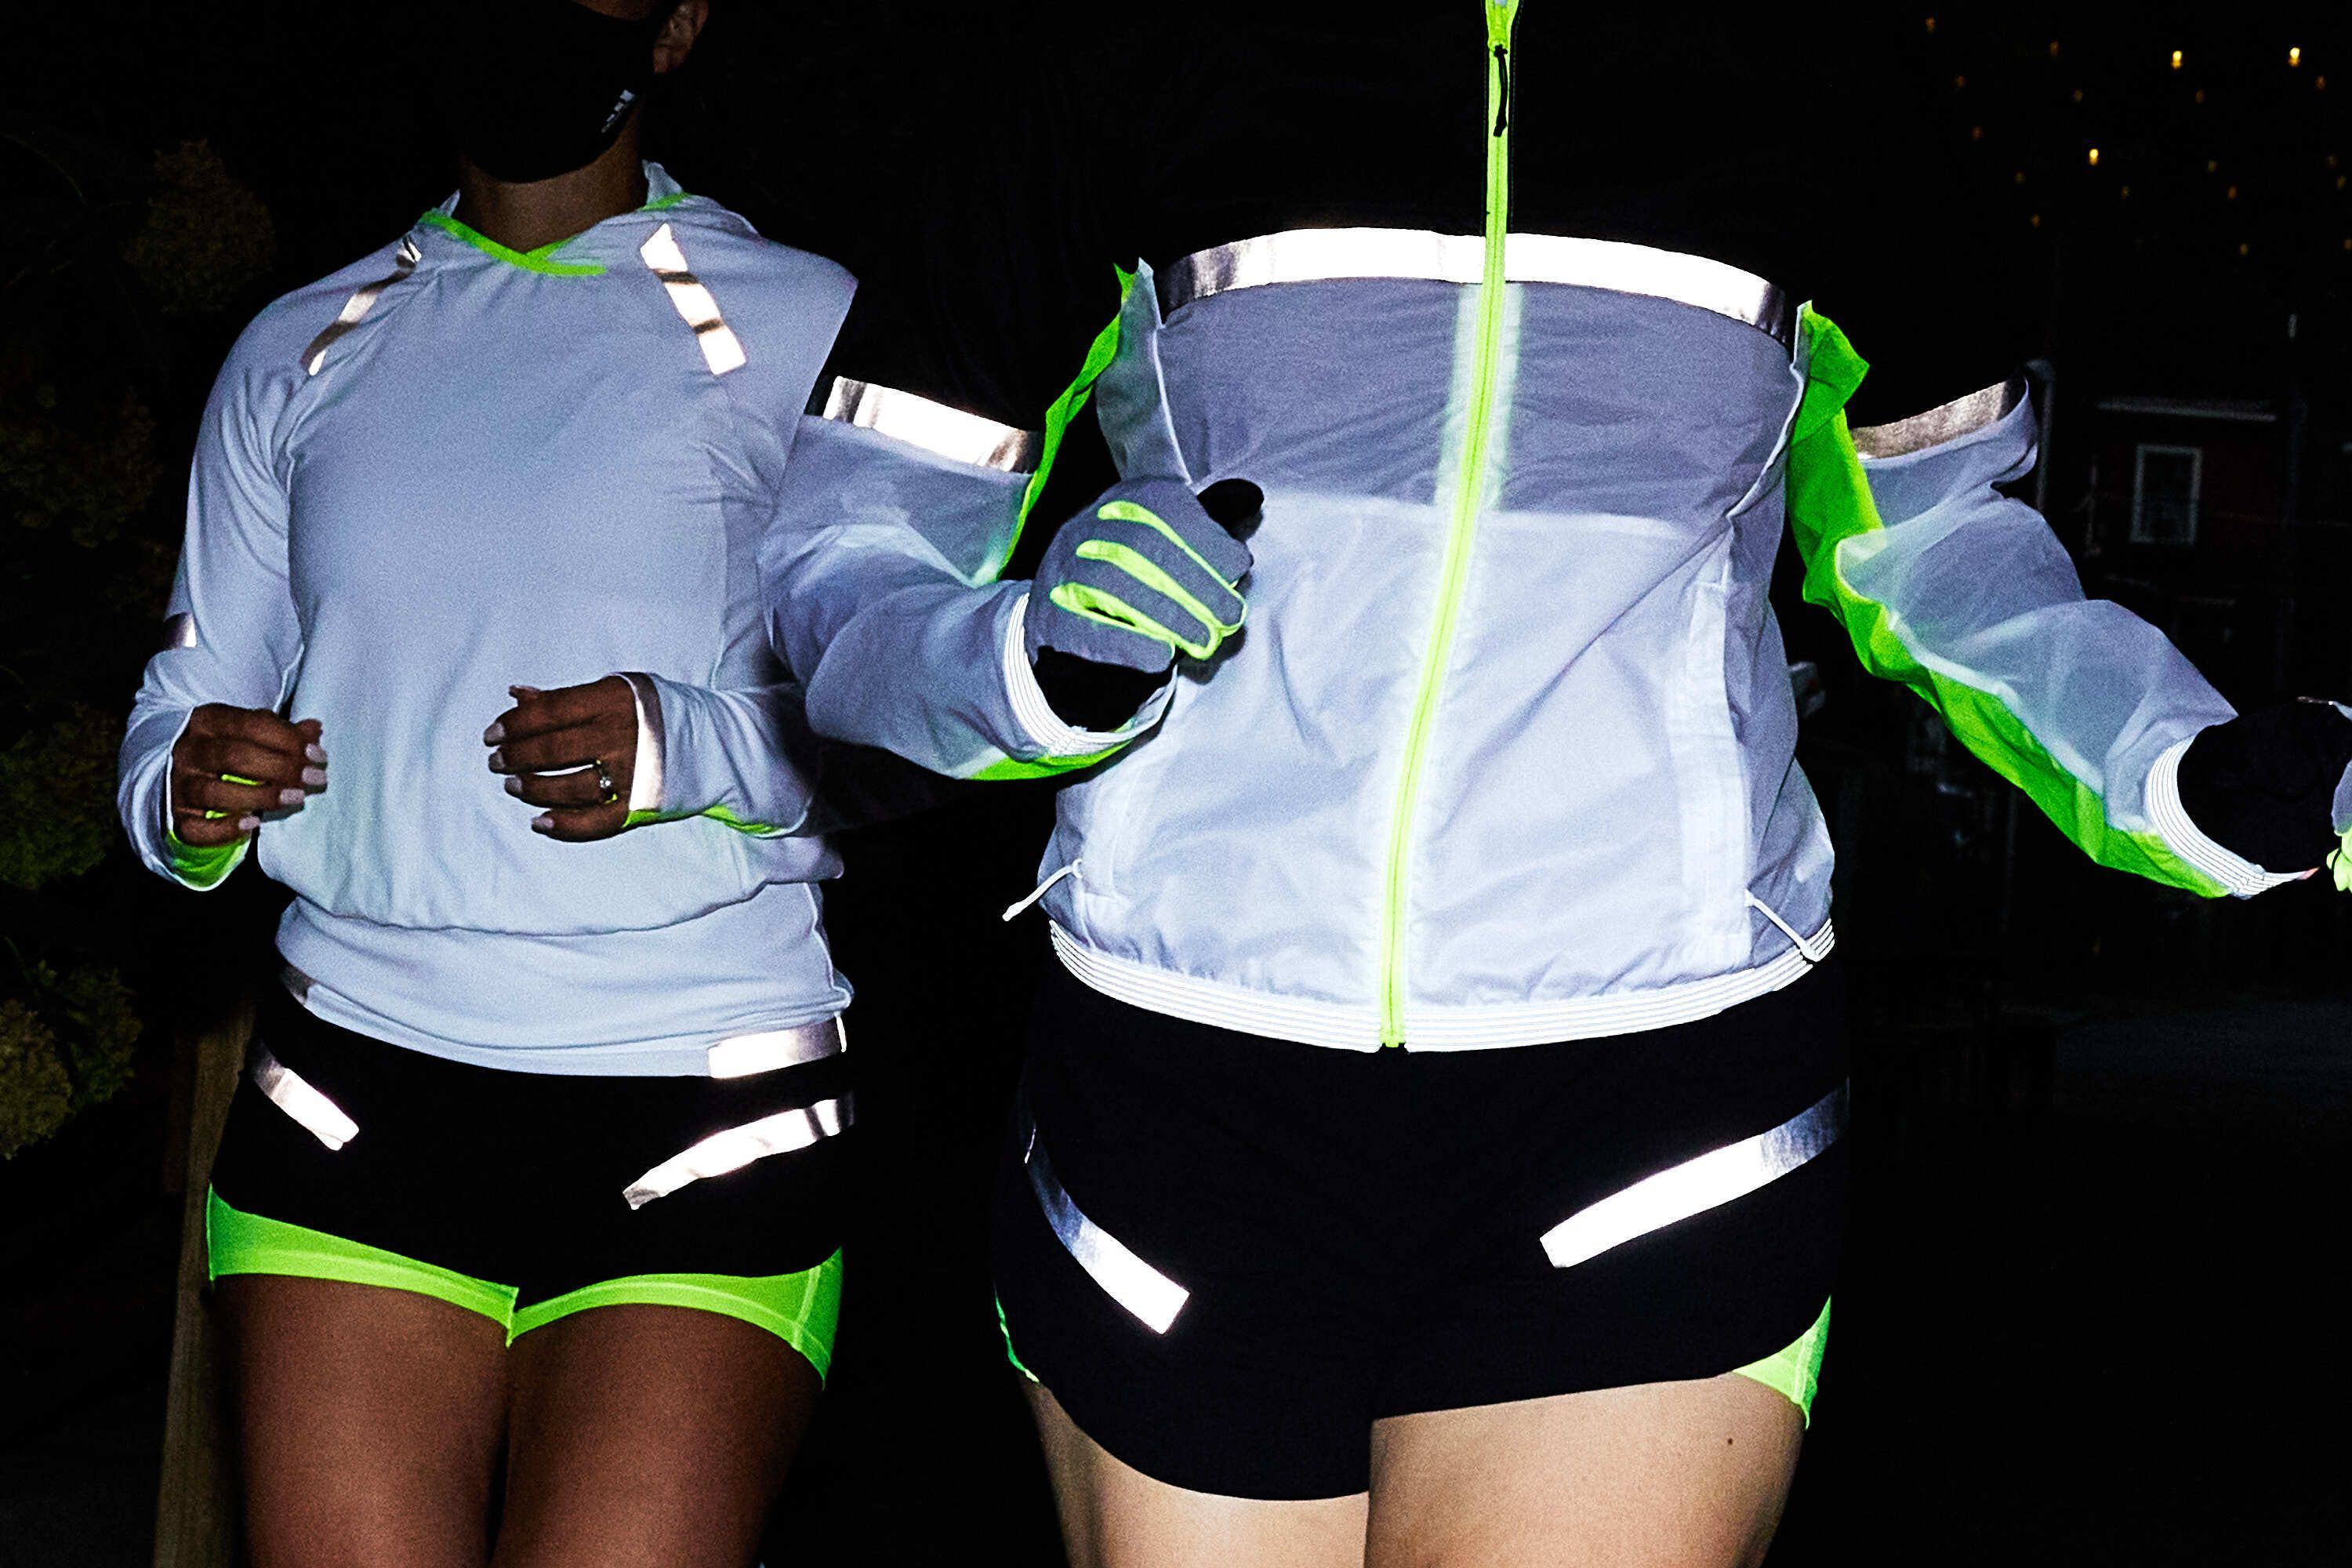 High Visibility Safety Reflective Vest Jacket Arm Leg Band for Night Running 